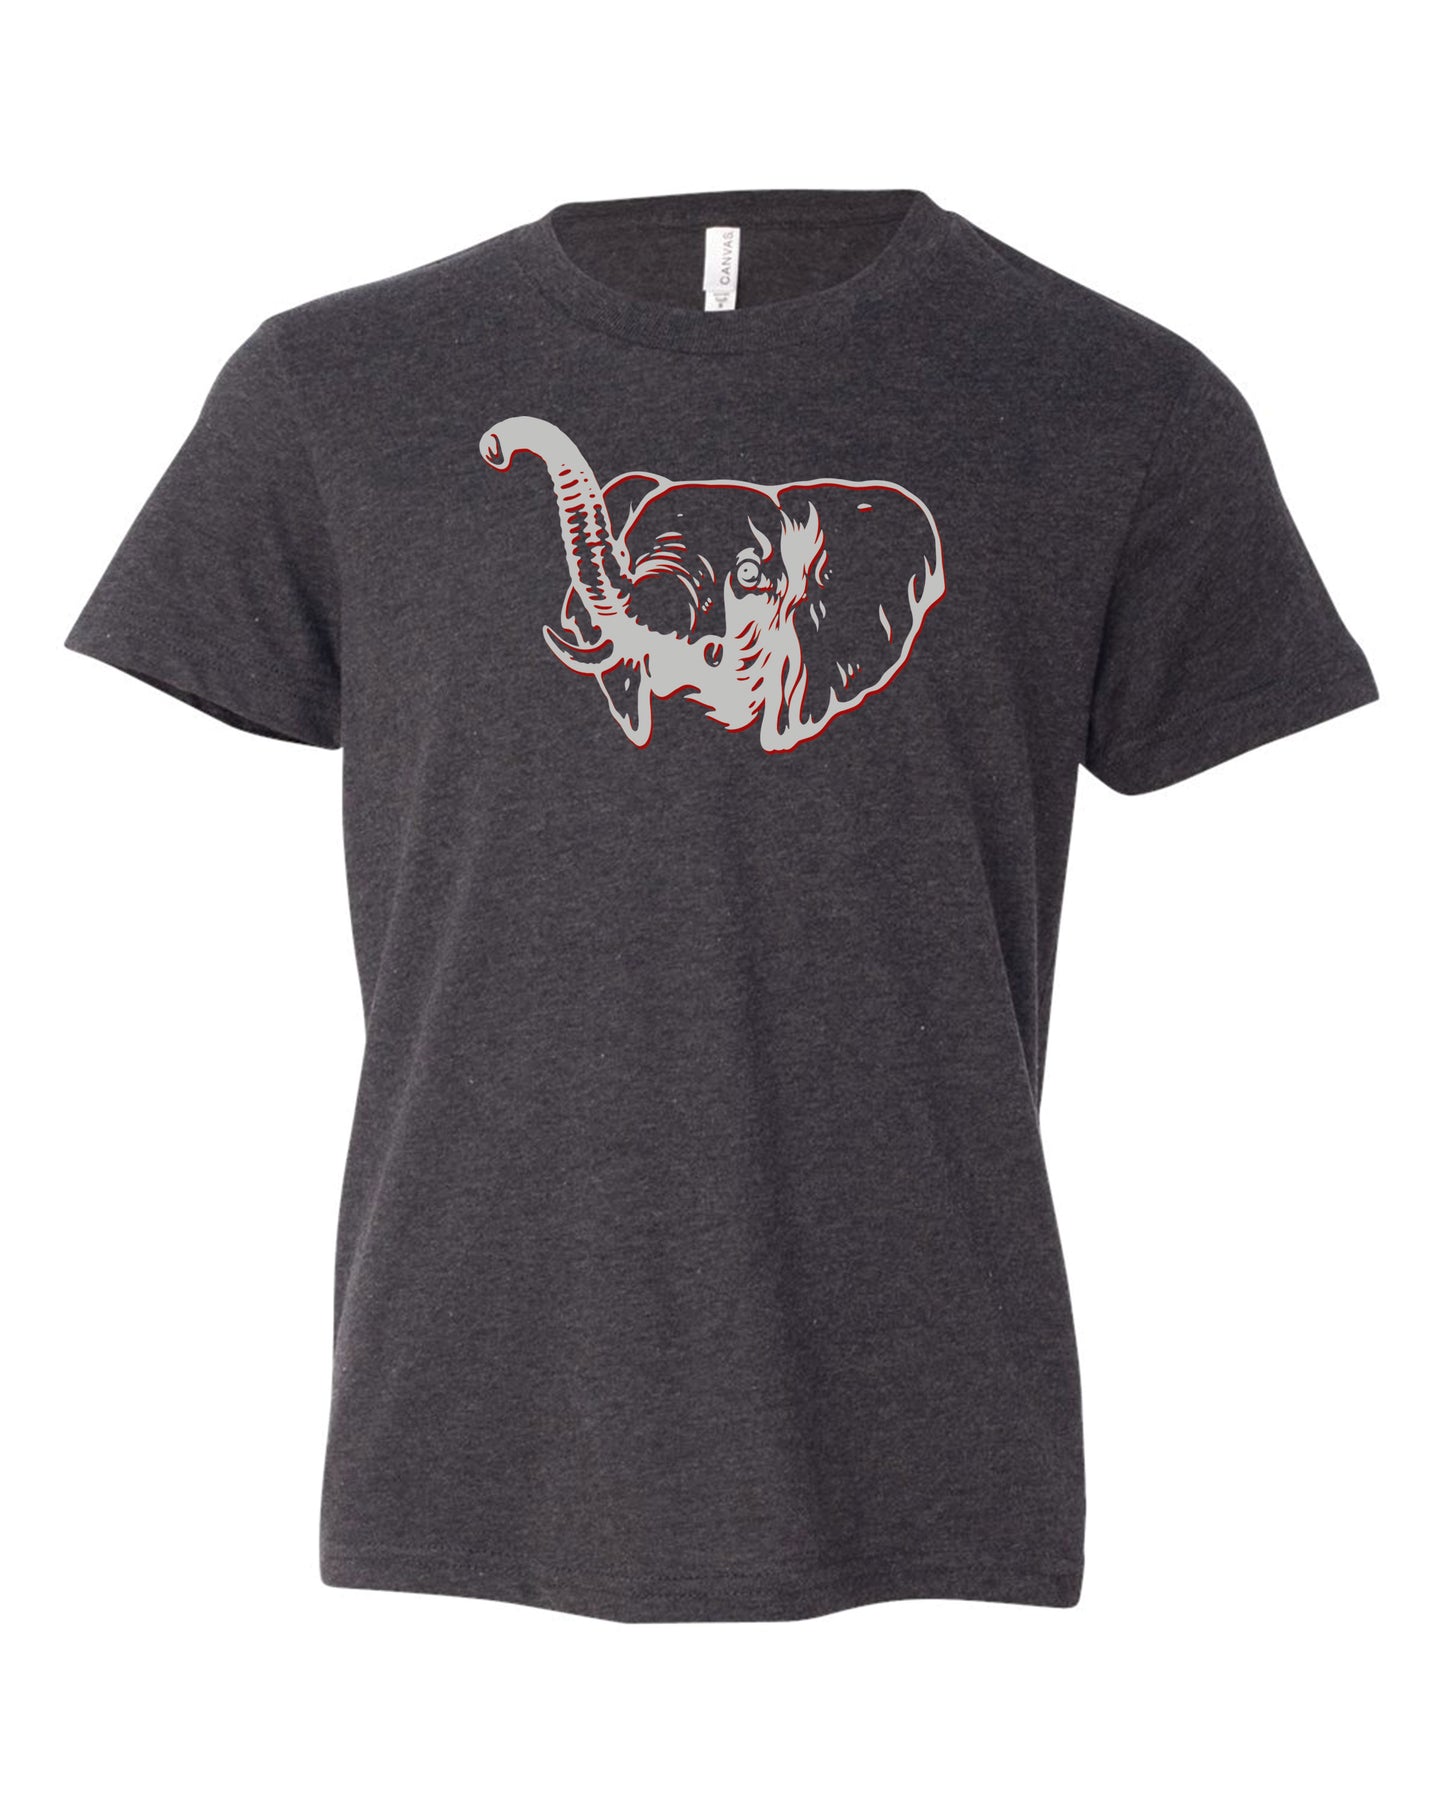 Sketch Elephant | Kids Tee | RTS-Kids Tees-Sister Shirts-Sister Shirts, Cute & Custom Tees for Mama & Littles in Trussville, Alabama.